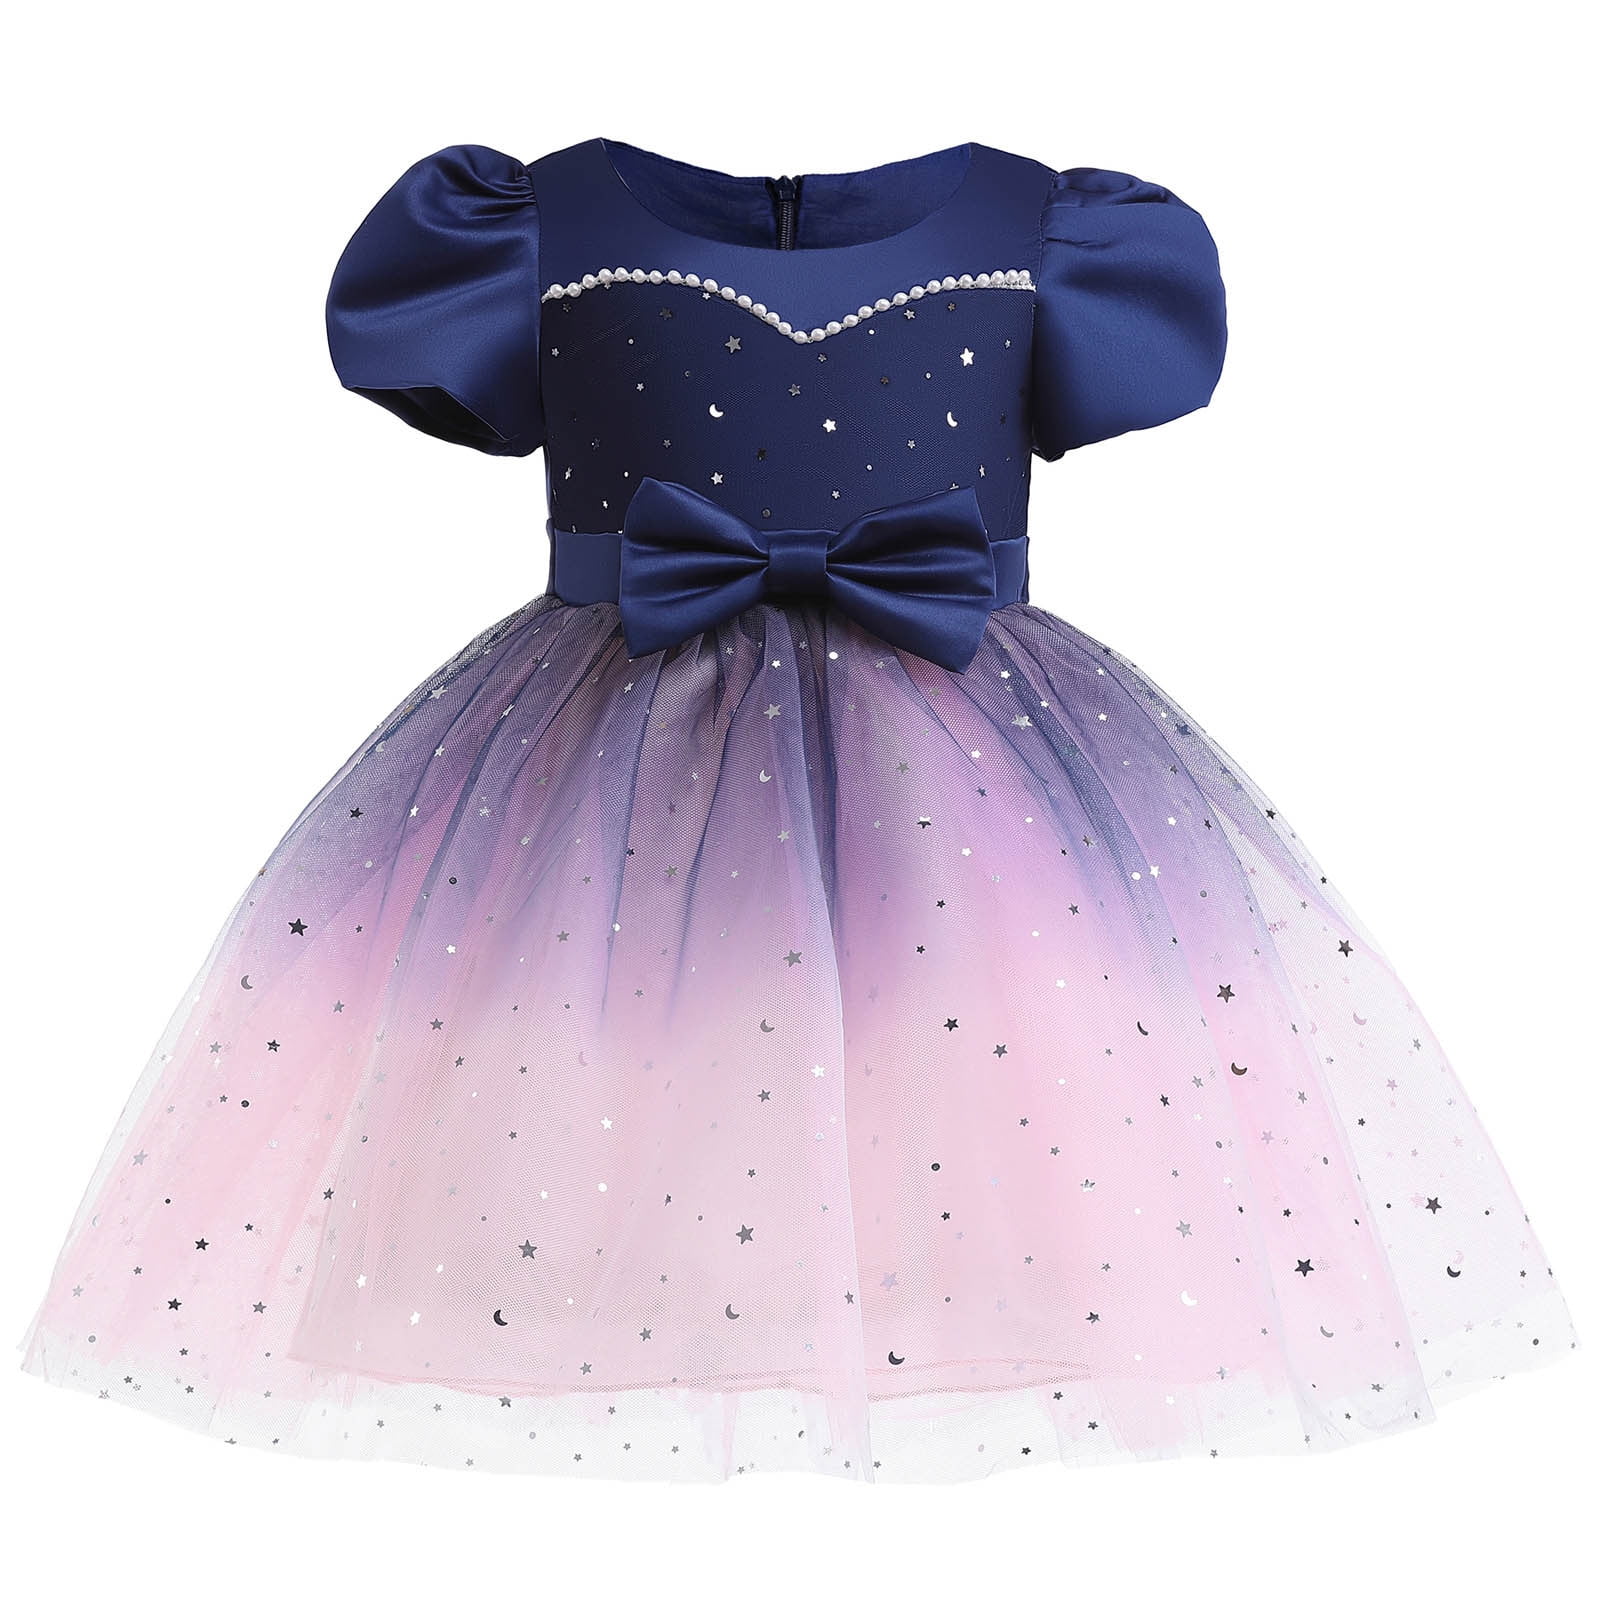 Girls Dresses Girls Party Dress 2022 Spring Autumn Fashion Sweet O Neck  Ball Gown Mesh Kids Princess 1 13 Years From Guayejuyi, $32.63 | DHgate.Com